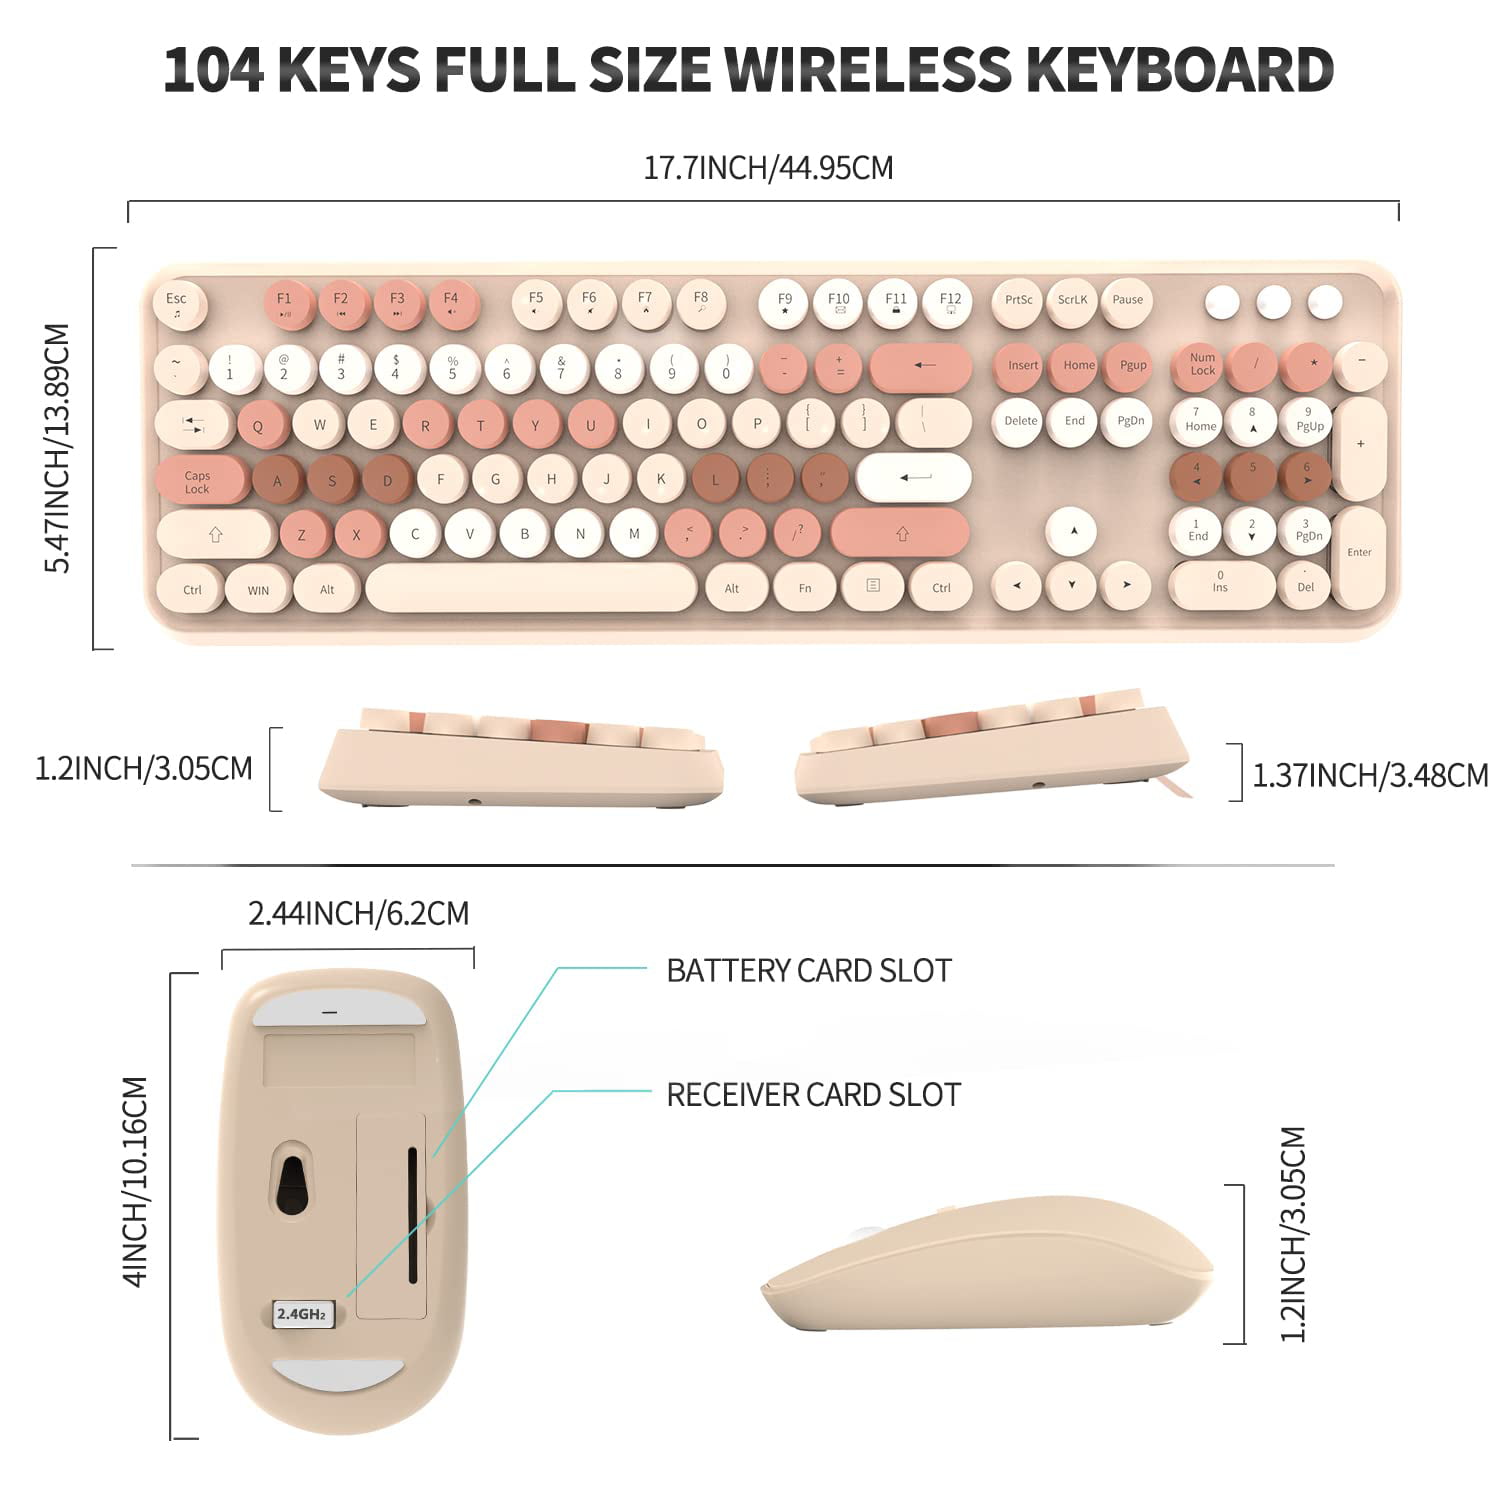 Wireless Keyboard Mouse Combo, 2.4GHz Wireless Typewriter Keyboard with 104  Colorful Round Keys, Letton Wireless Retro Full Size Keyboard and Cute  Mouse with DPI for PC Laptop Mac Desktop